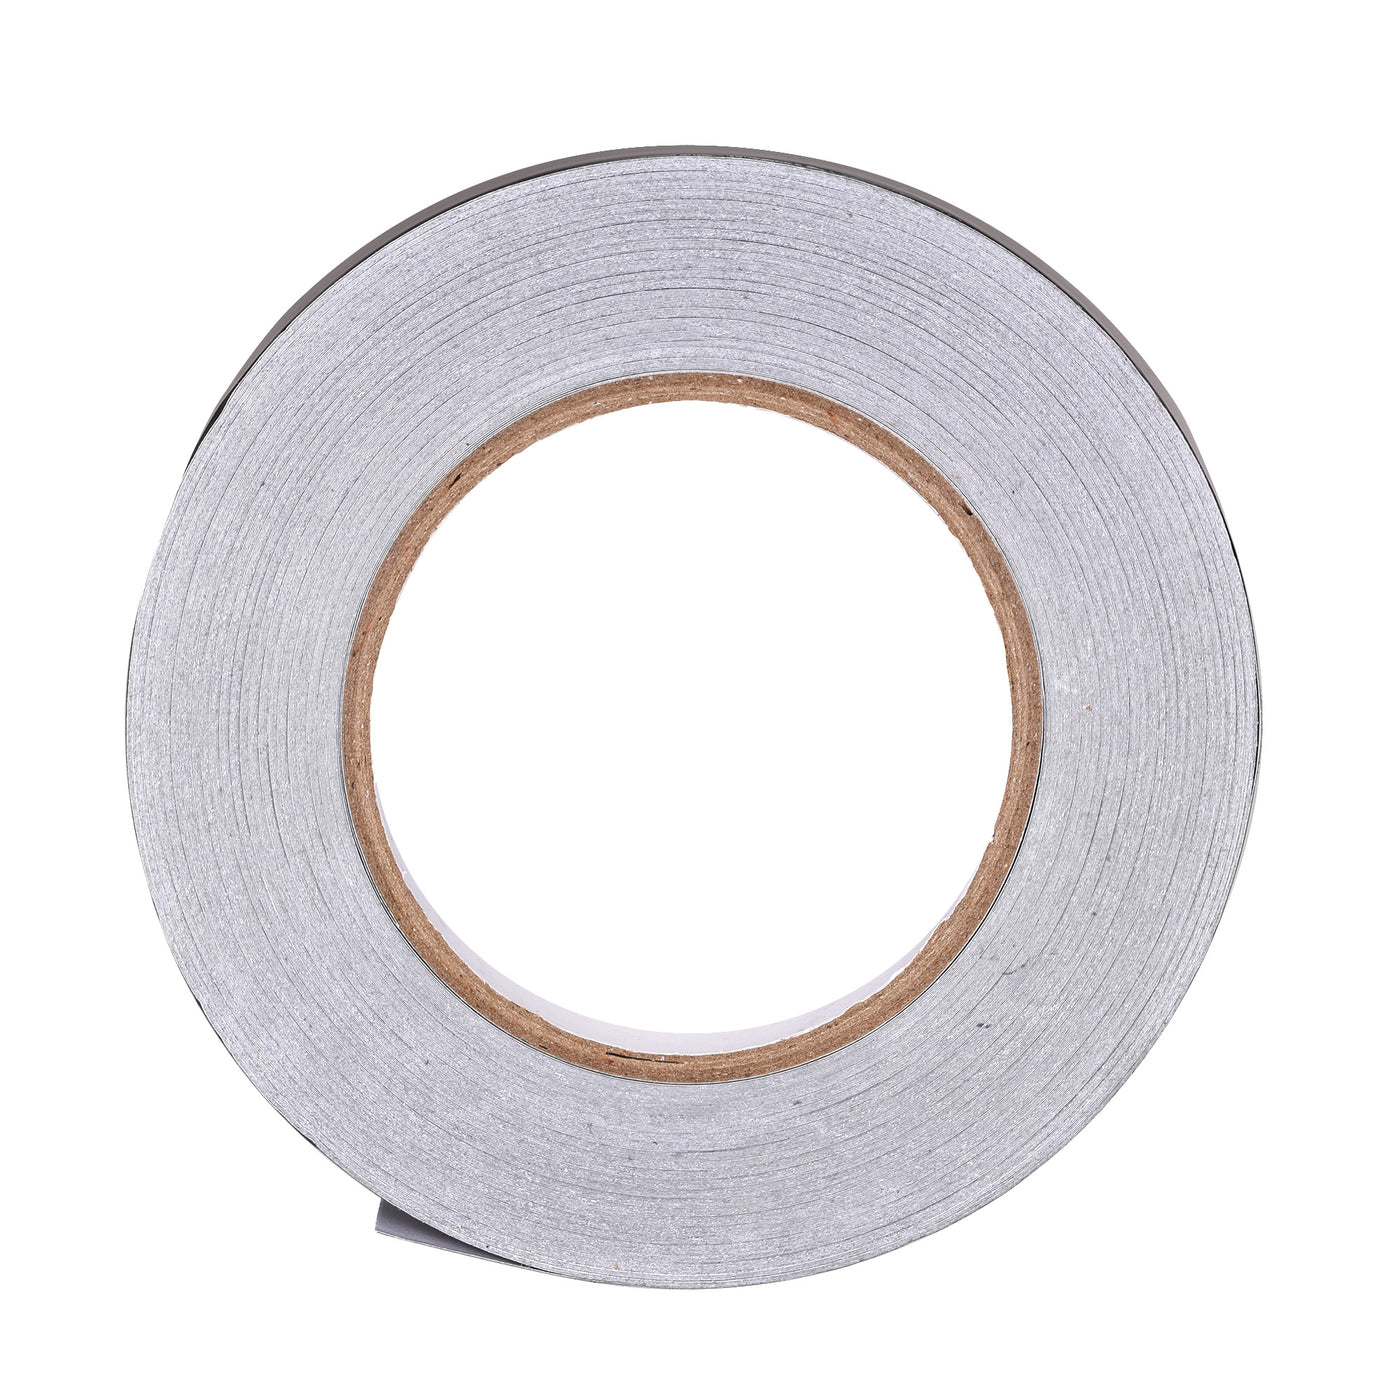 uxcell Uxcell 15mm Aluminum Foil Tape for HVAC, Patching Hot and Blocking light 50m/164ft